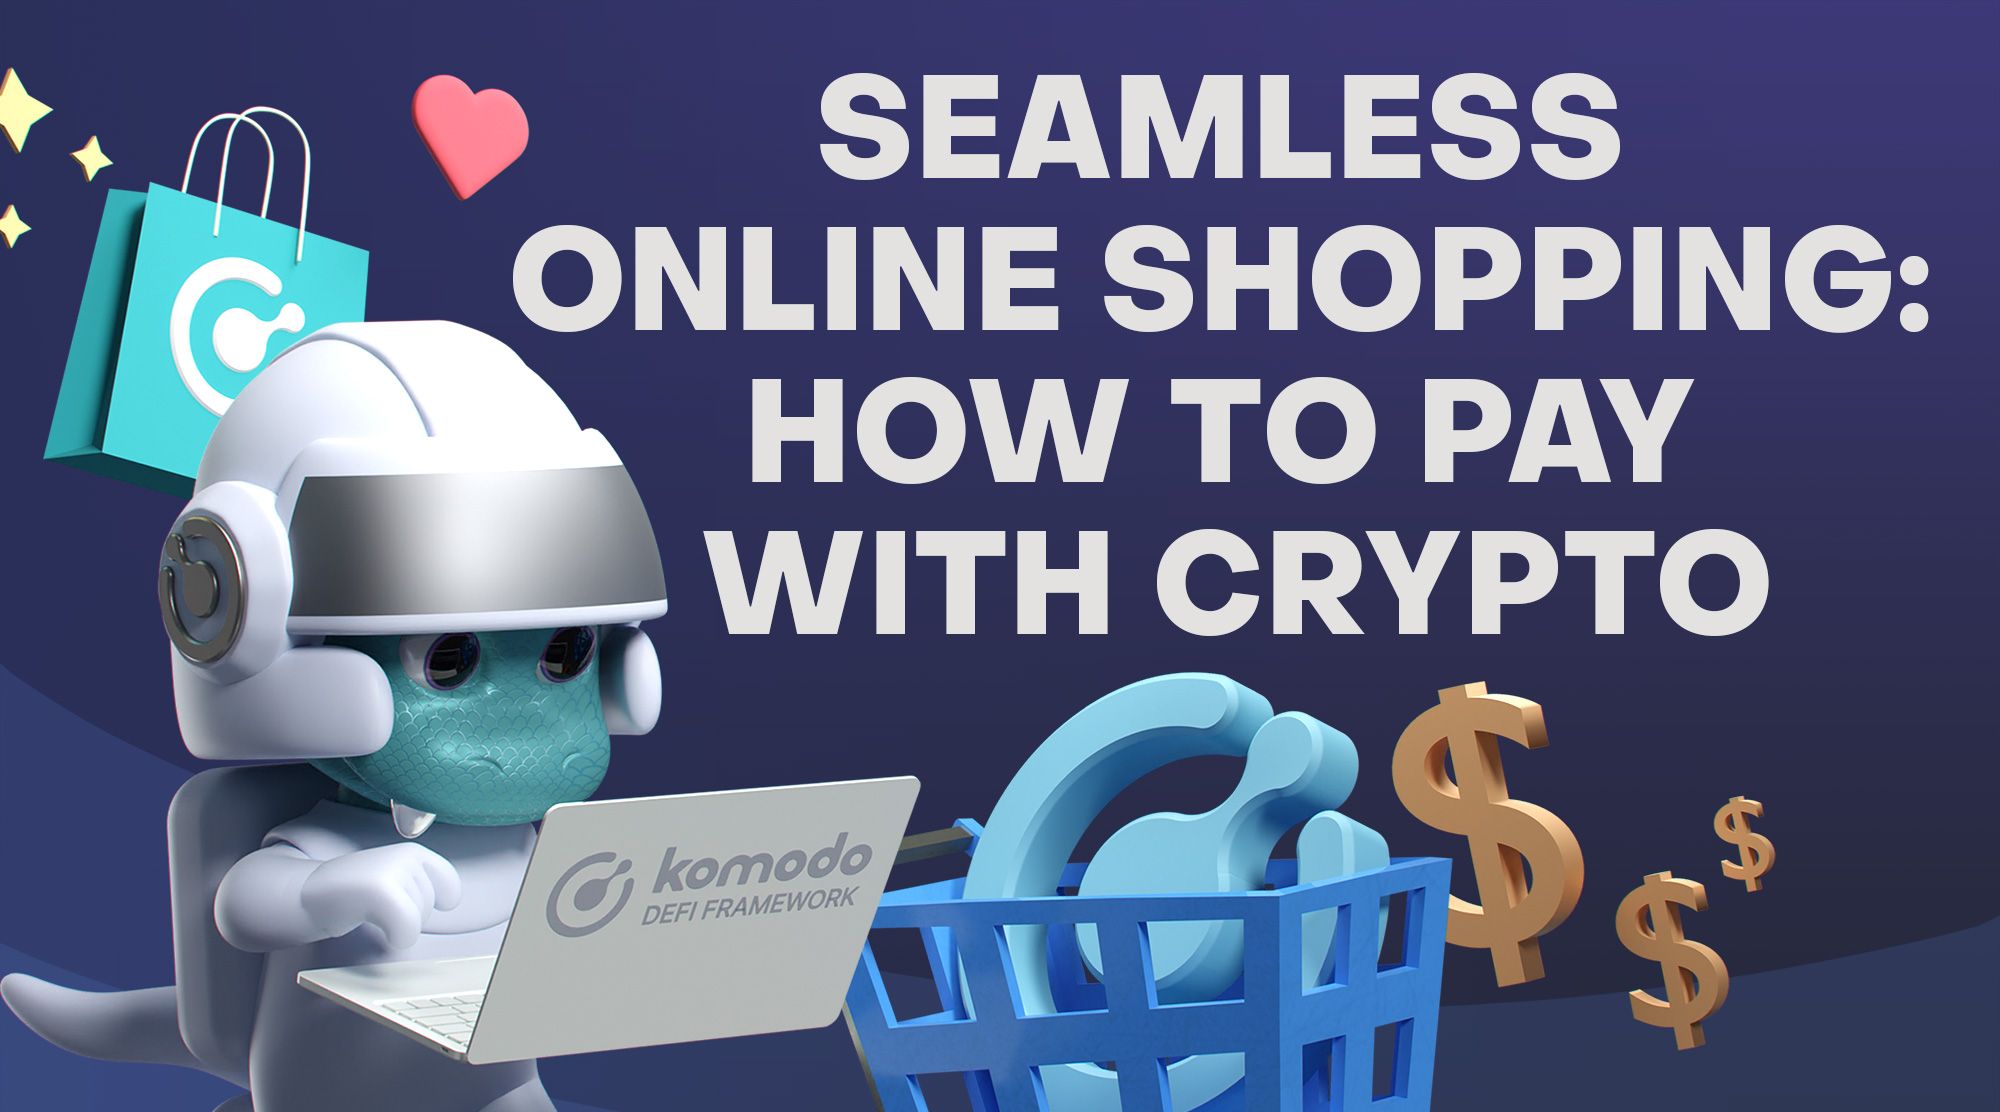 Seamless Online Shopping: How to Pay with Crypto